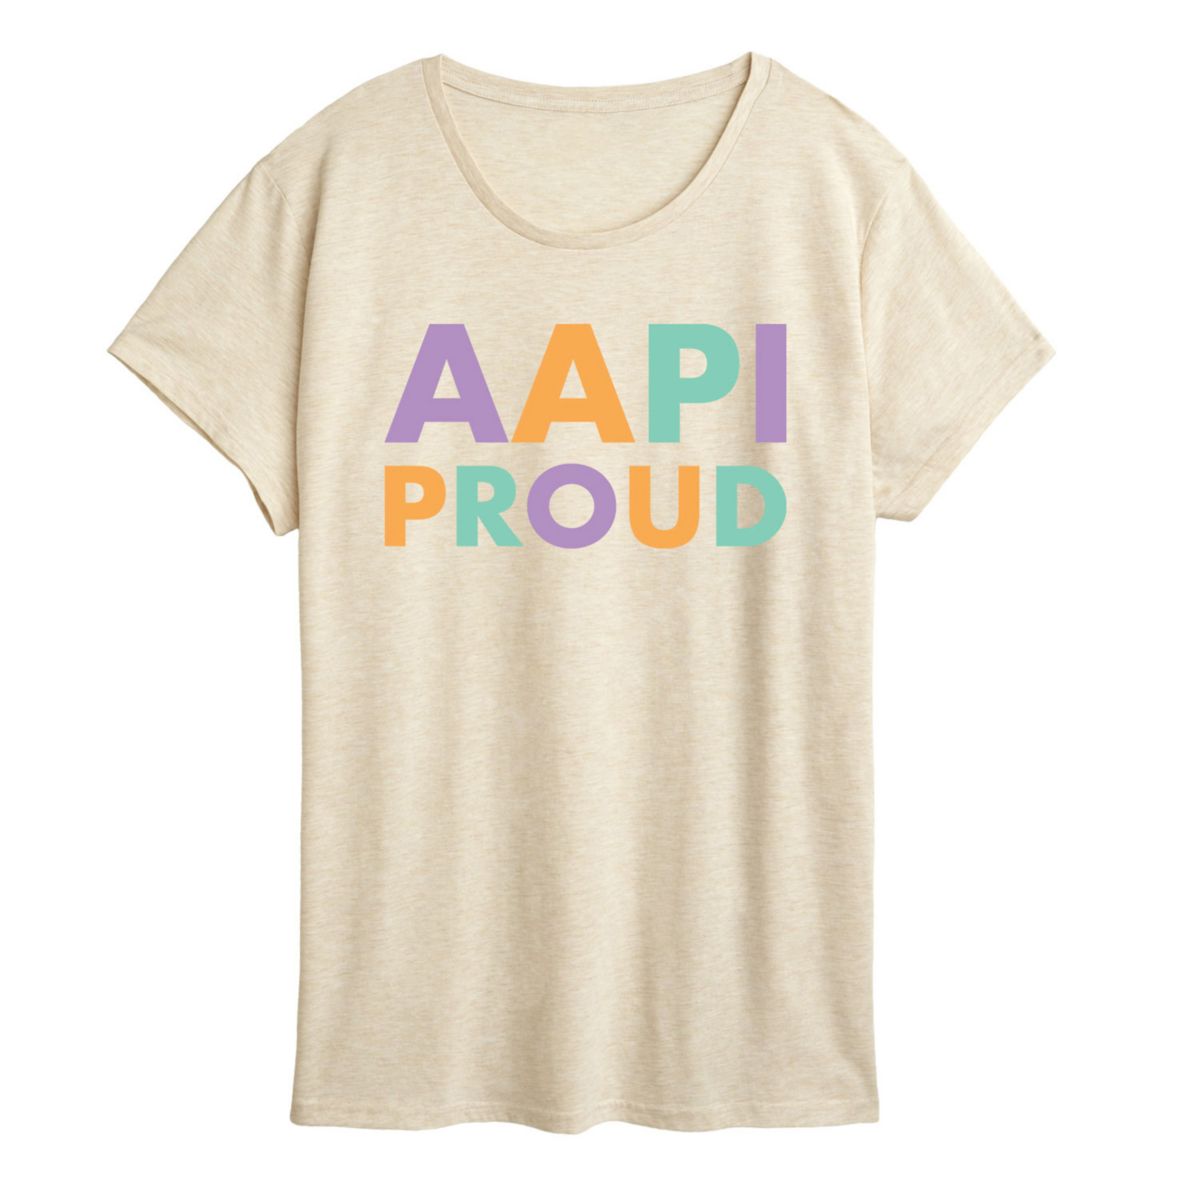 Plus AAPI Proud Graphic Tee Unbranded